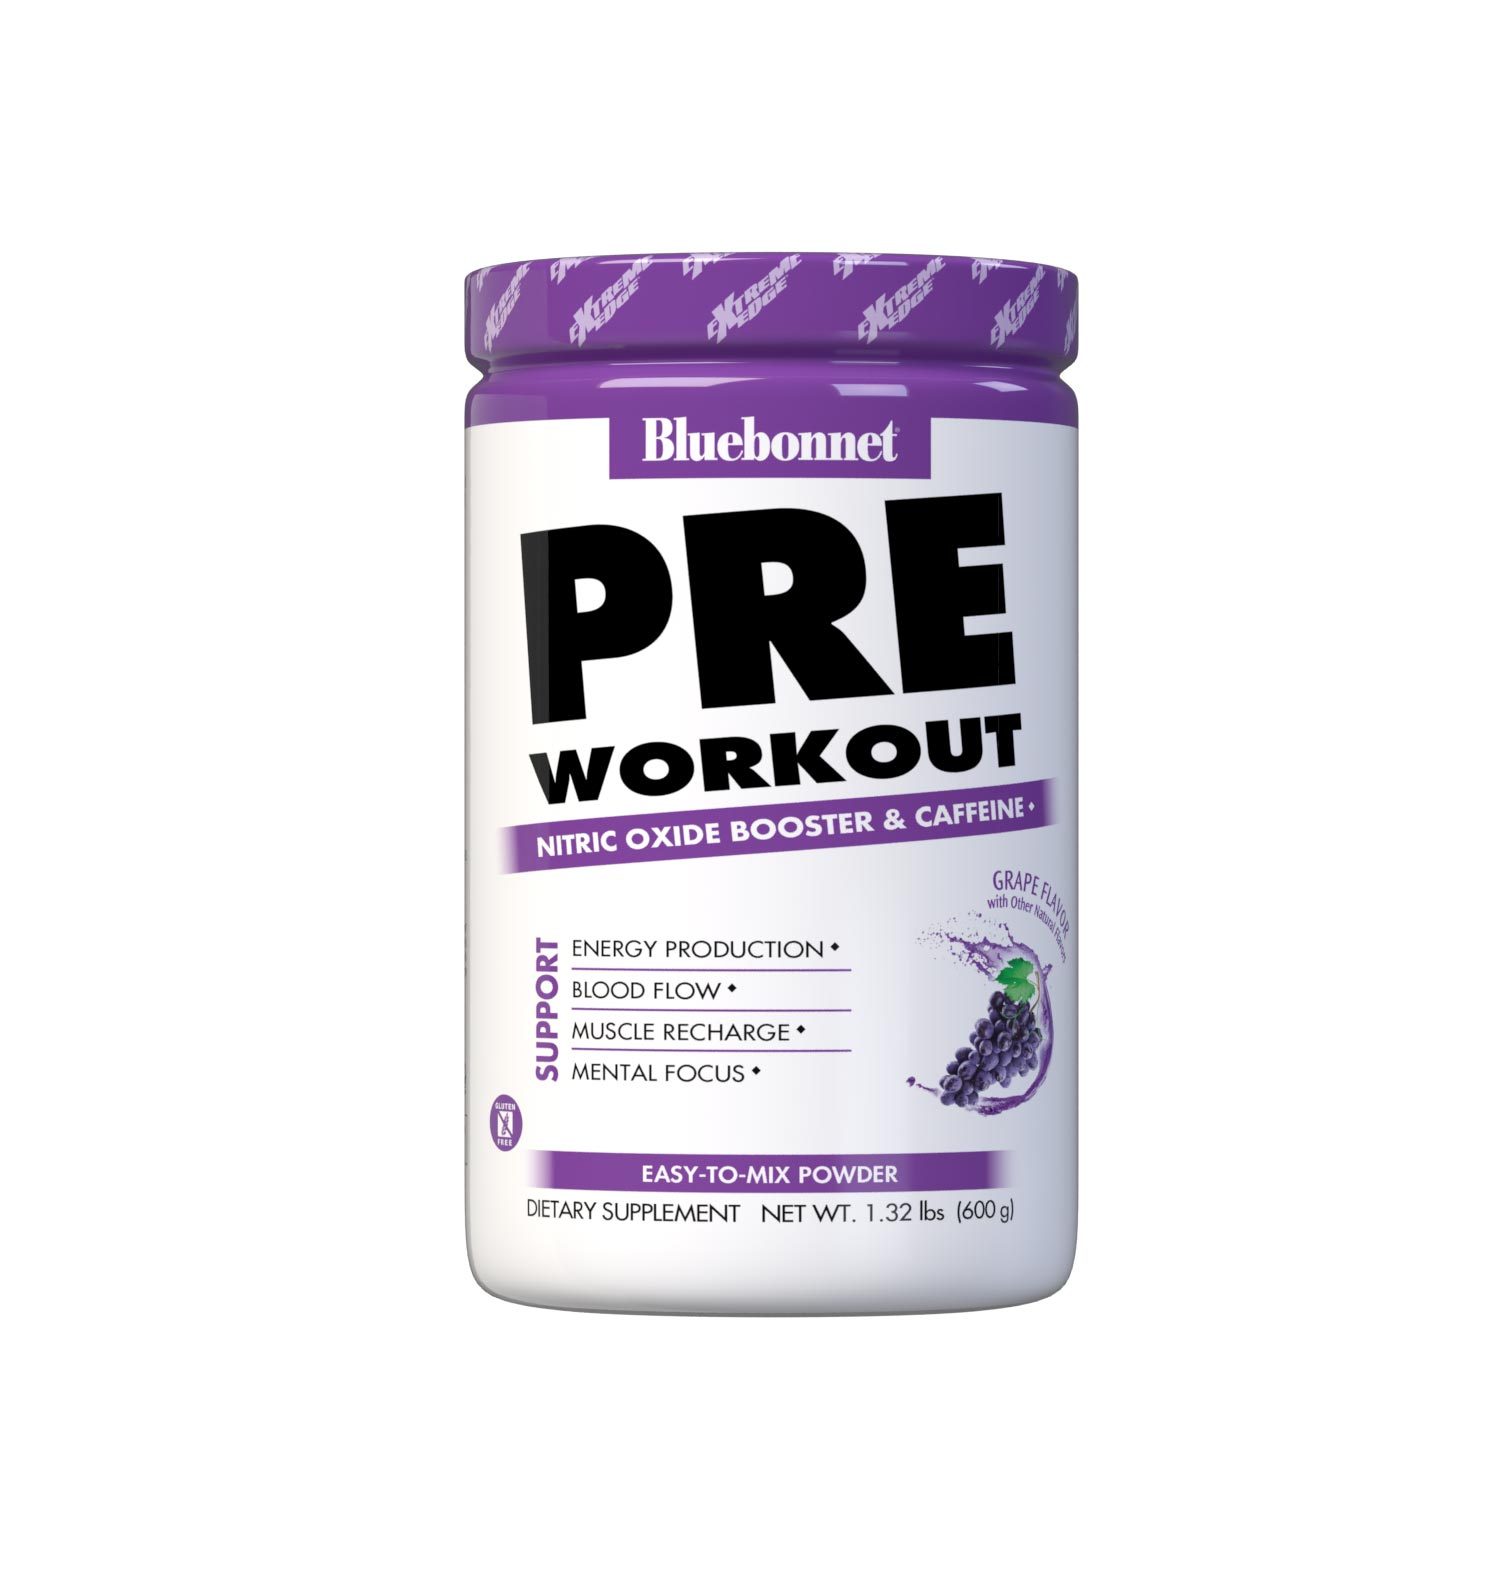 Bluebonnet's Grape Flavored Pre Workout powder is designed to be one of the most comprehensive, muscle recharging formulas ever created. This triple-turbo, super-charged formula generates high energy, sharpens mental concentration, and increases nitric oxide (NO) levels for greater blood flow and intense muscle pumps. #size_1.32 lb